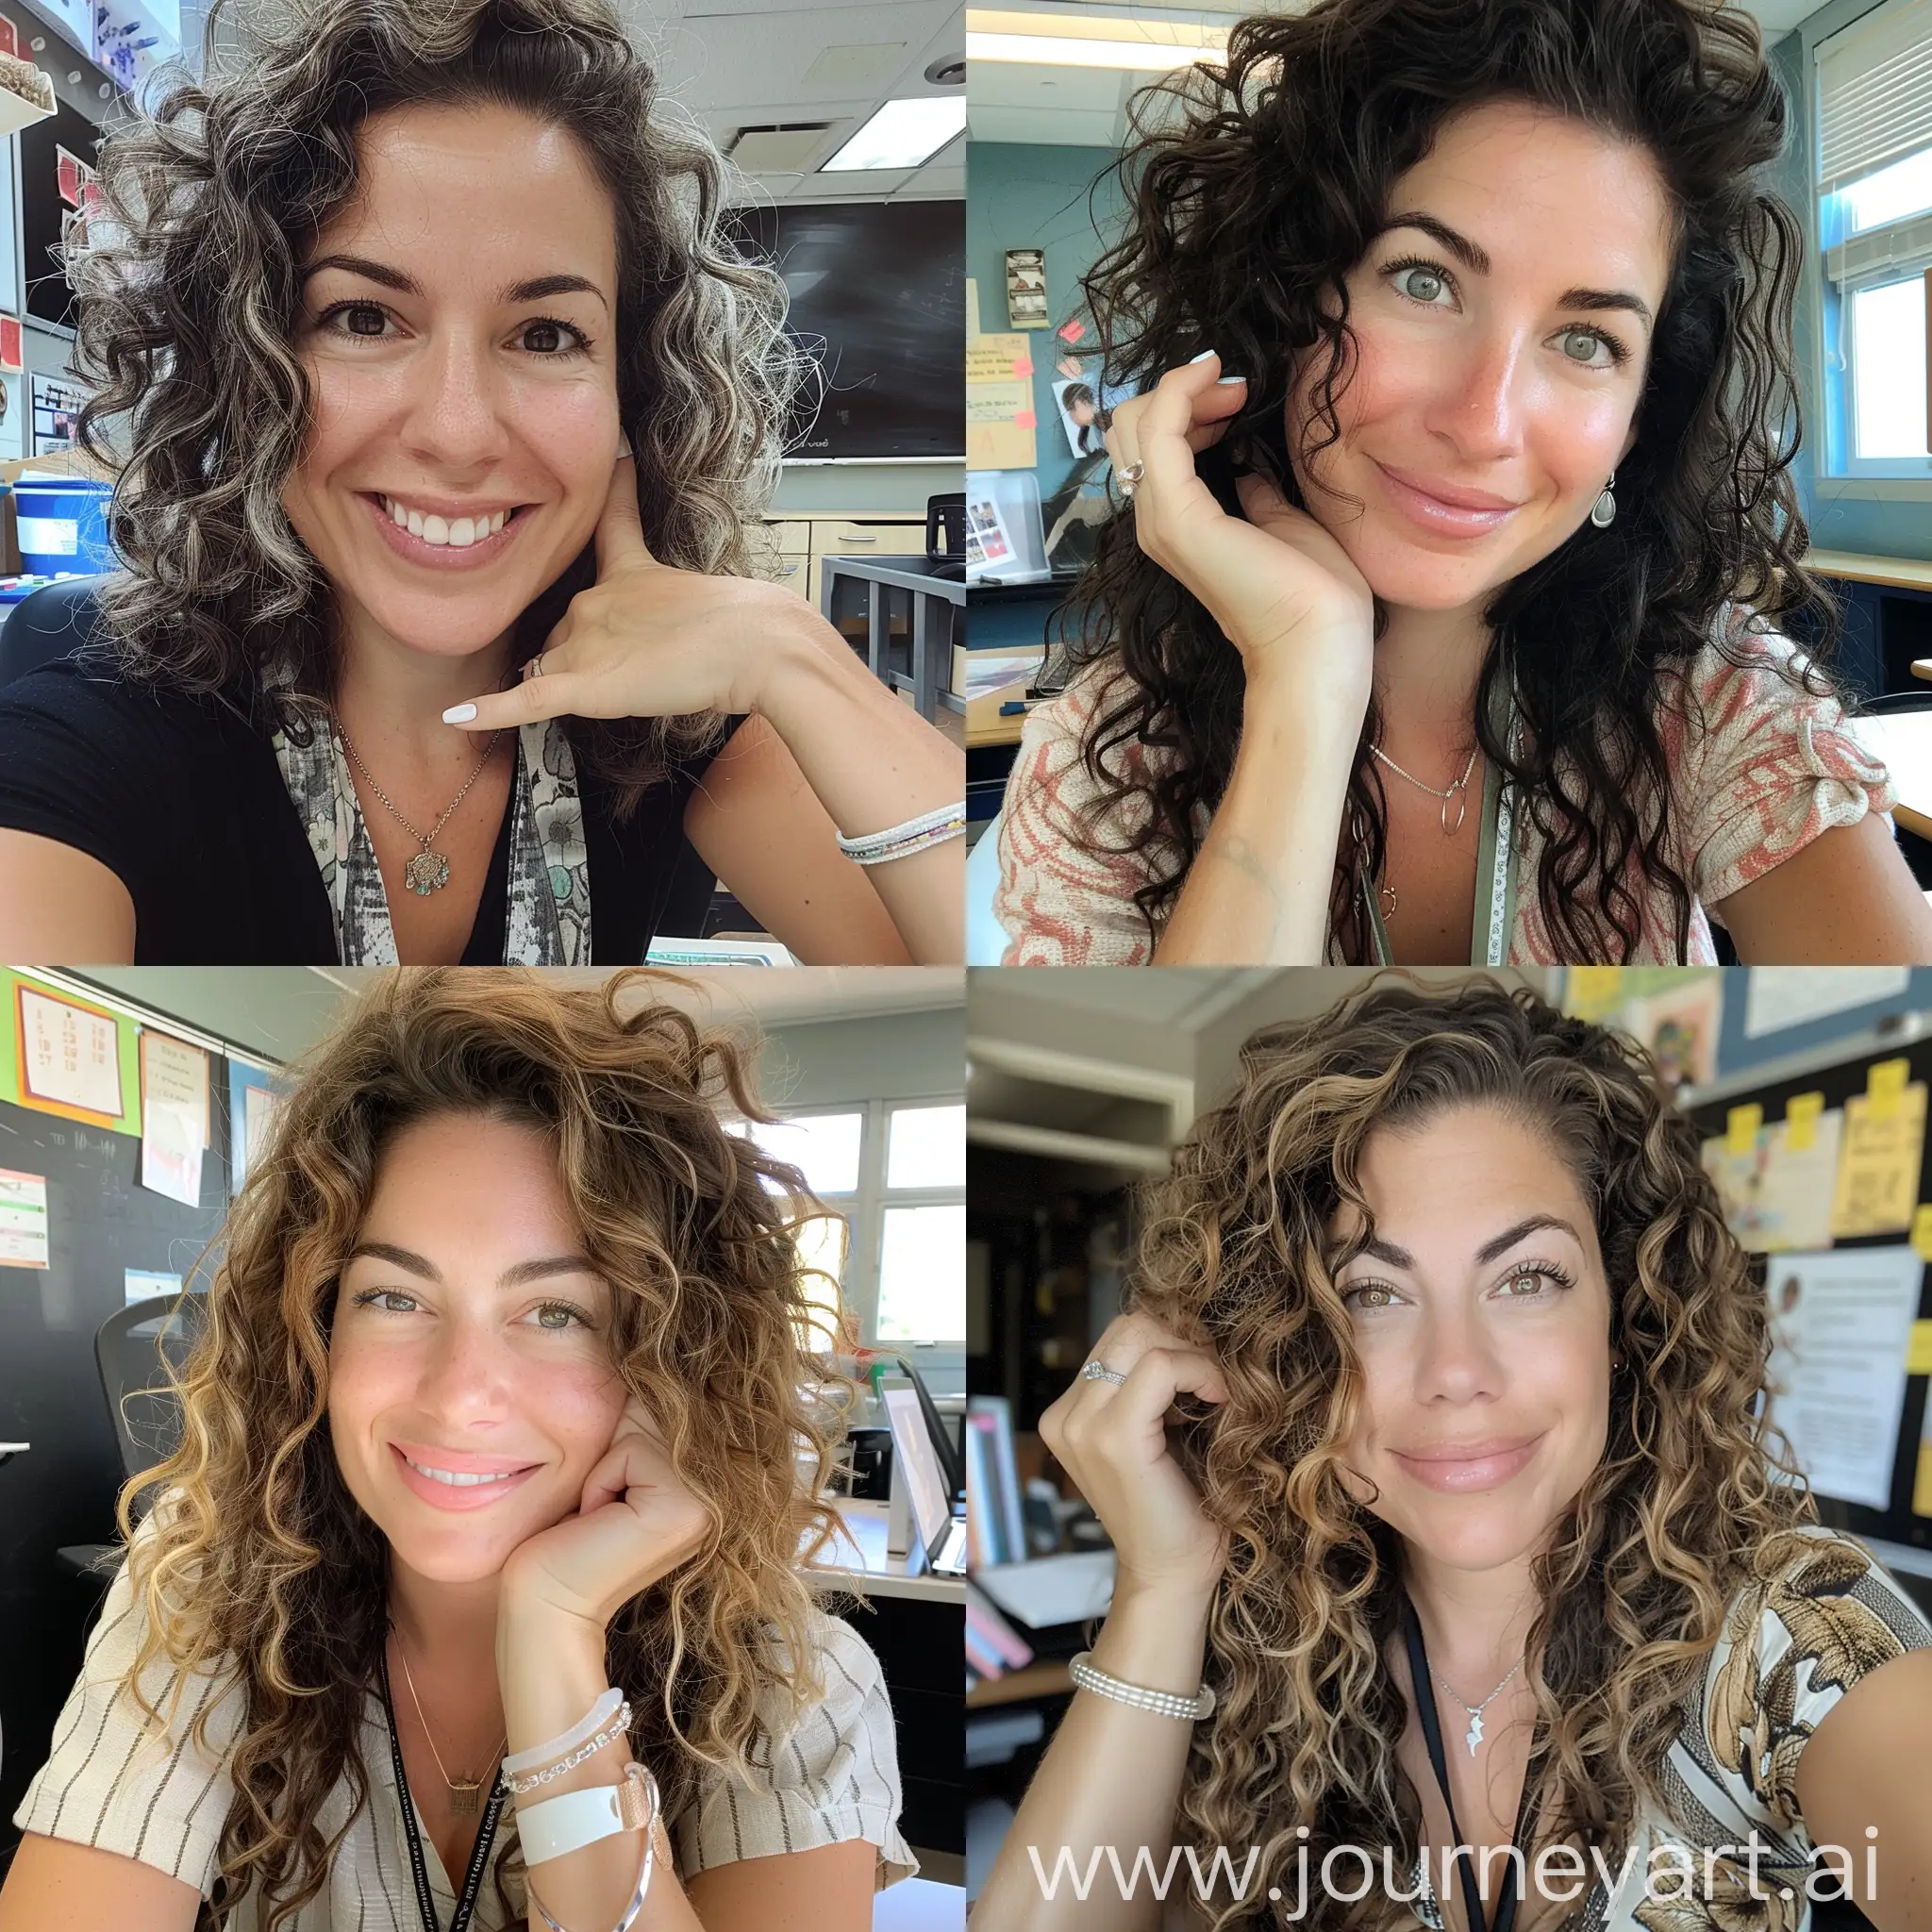 Aesthetic instagram selfie of a elementary school teacher, at her desk, gorgeous, curly hair, bushy eyebrows, happy, lanyard around neck, looking into camera, one hand resting on desk, hand visible in selfie photo, wedding ring, white gel nail polish